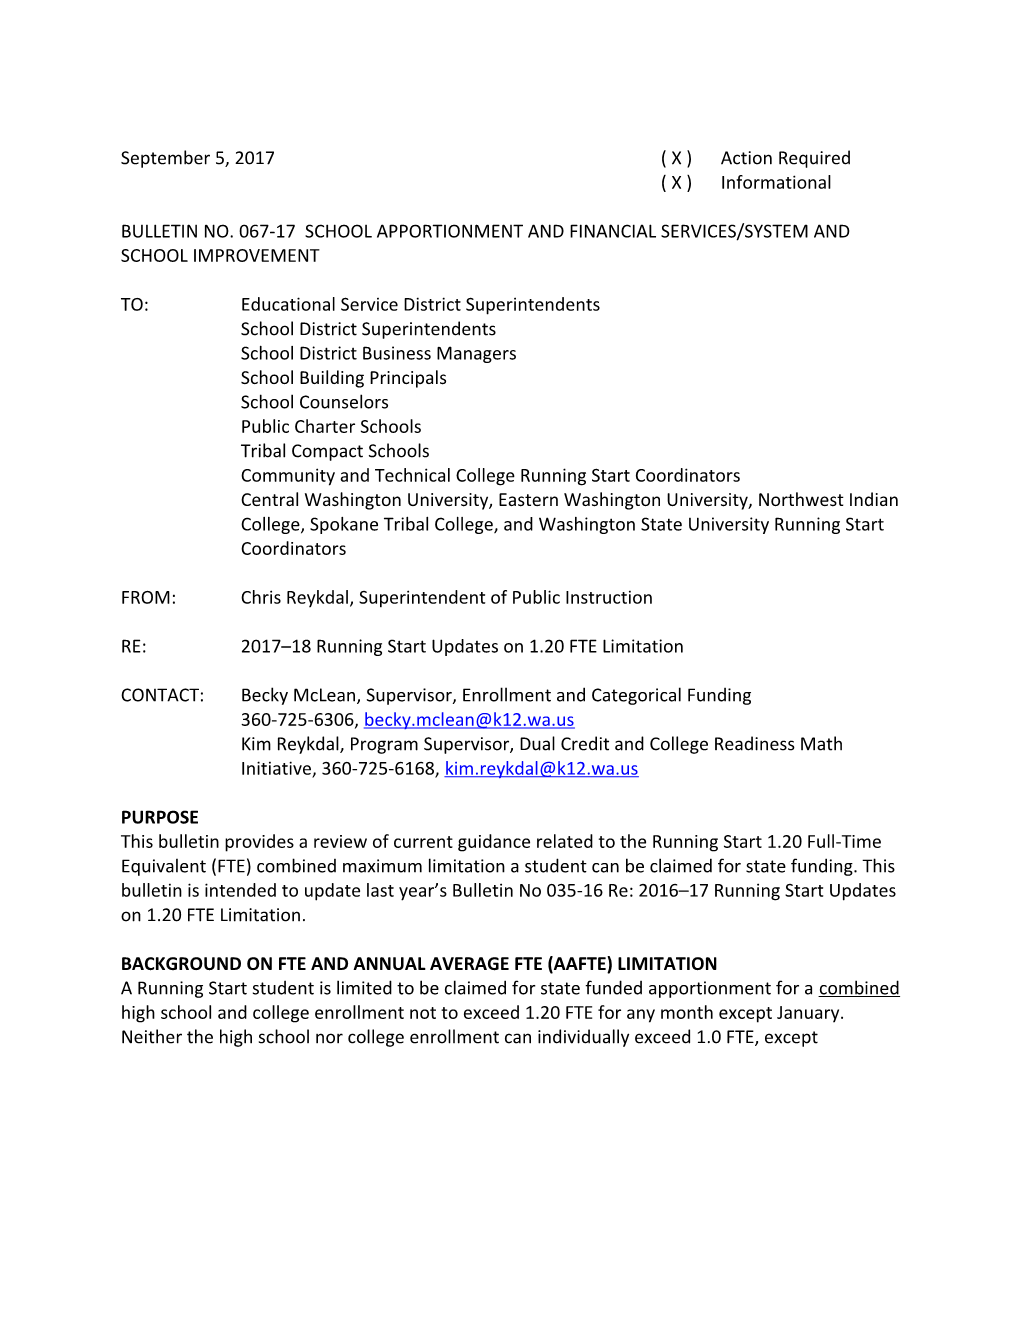 Bulletin No. 067-17 School Apportionment and Financial Services/System and School Improvement